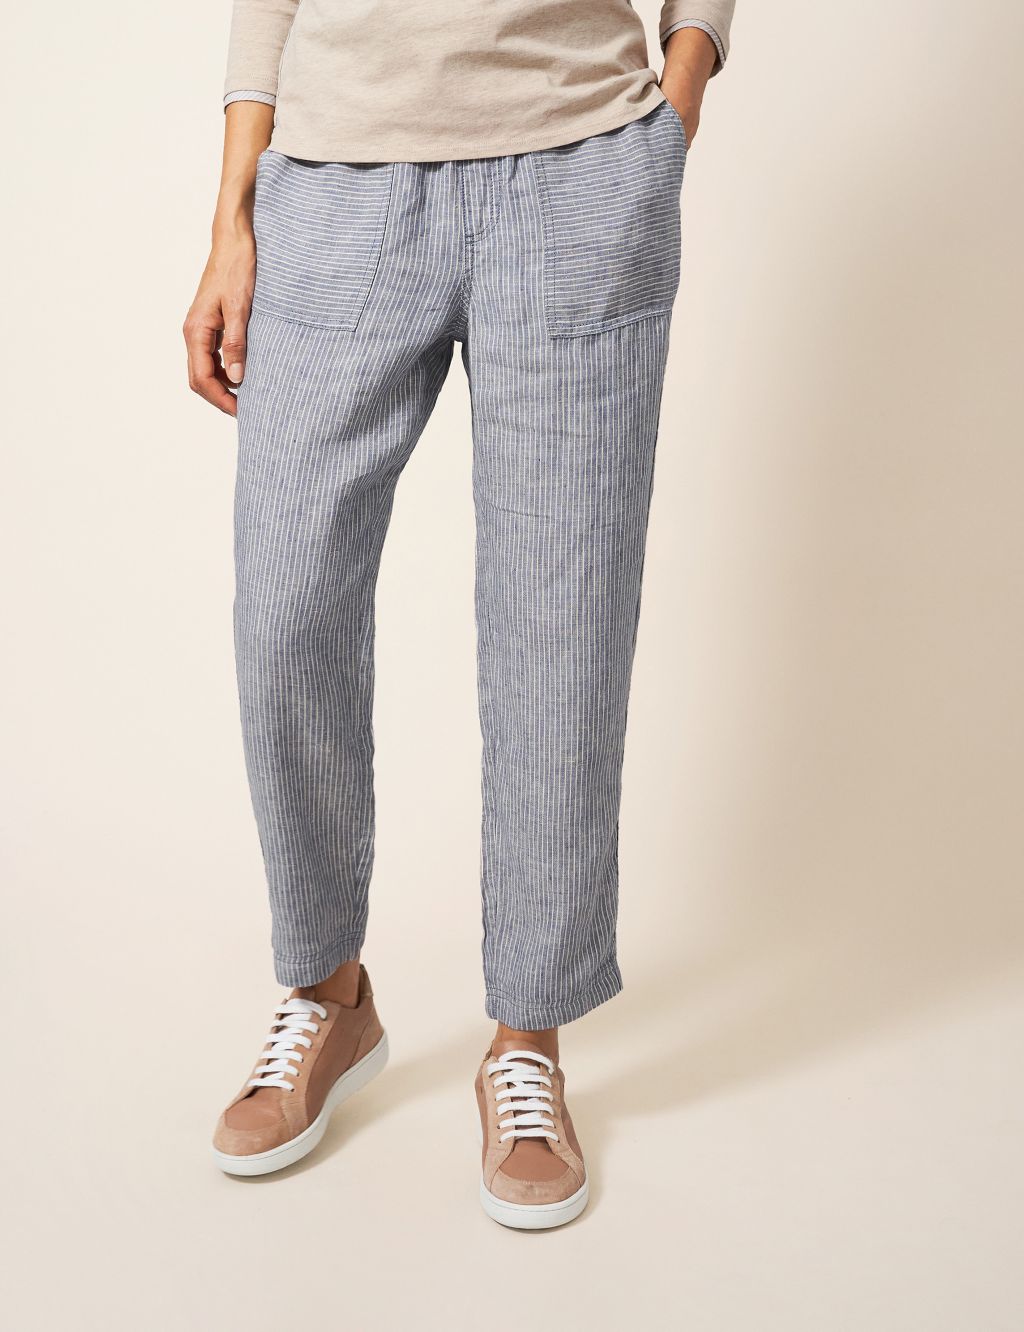 Pure Linen Striped Slim Fit Trousers image 1